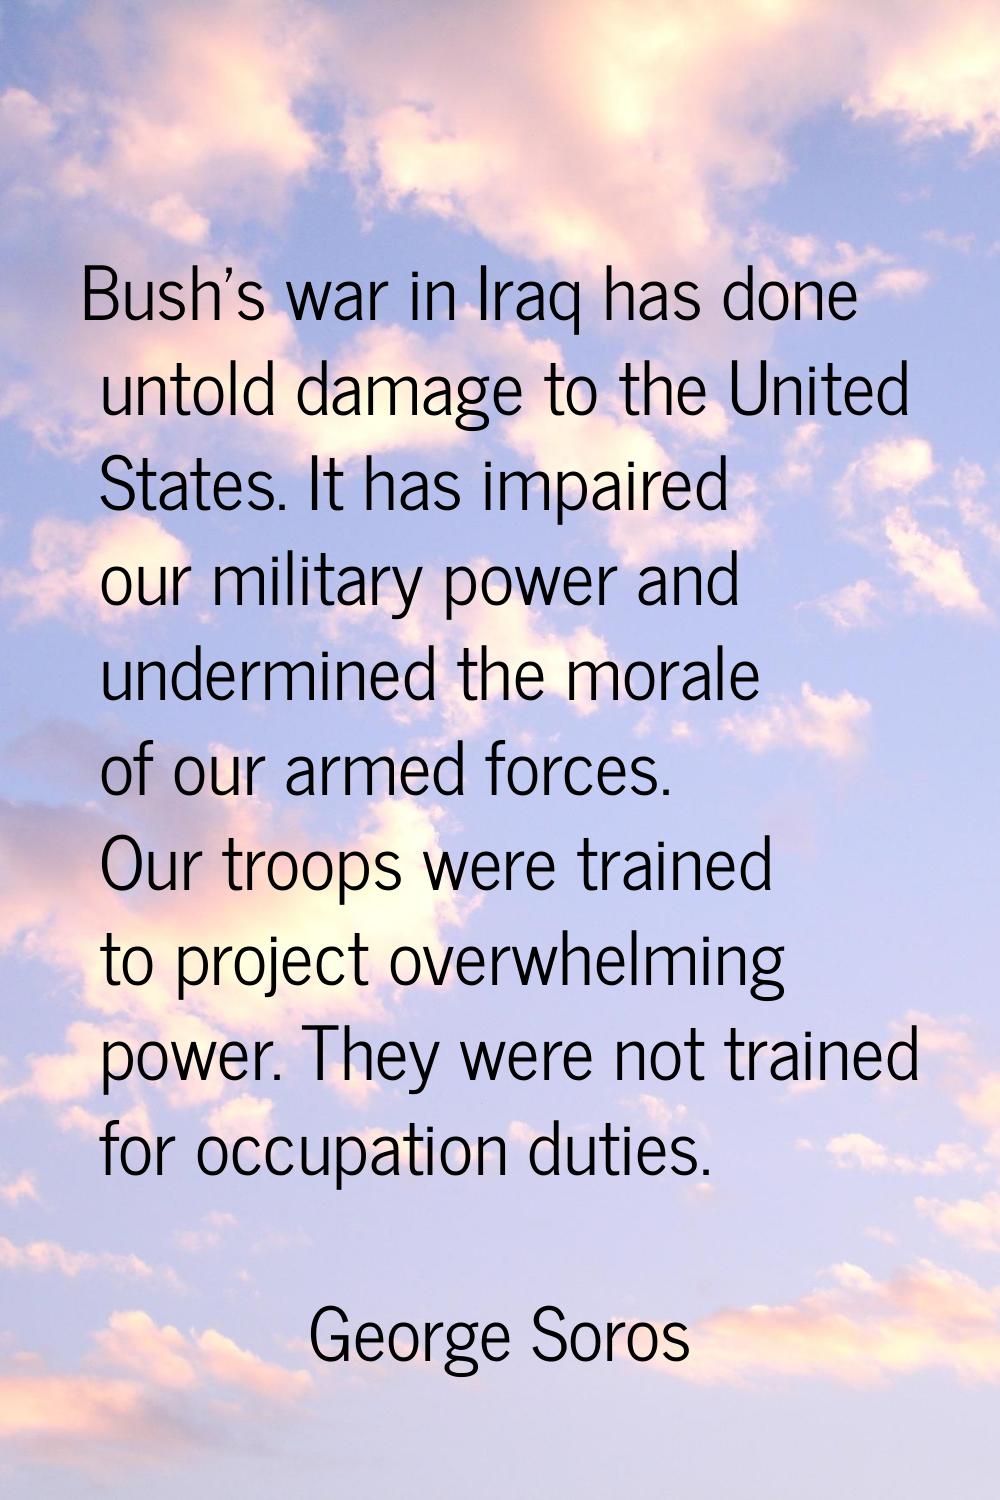 Bush's war in Iraq has done untold damage to the United States. It has impaired our military power 